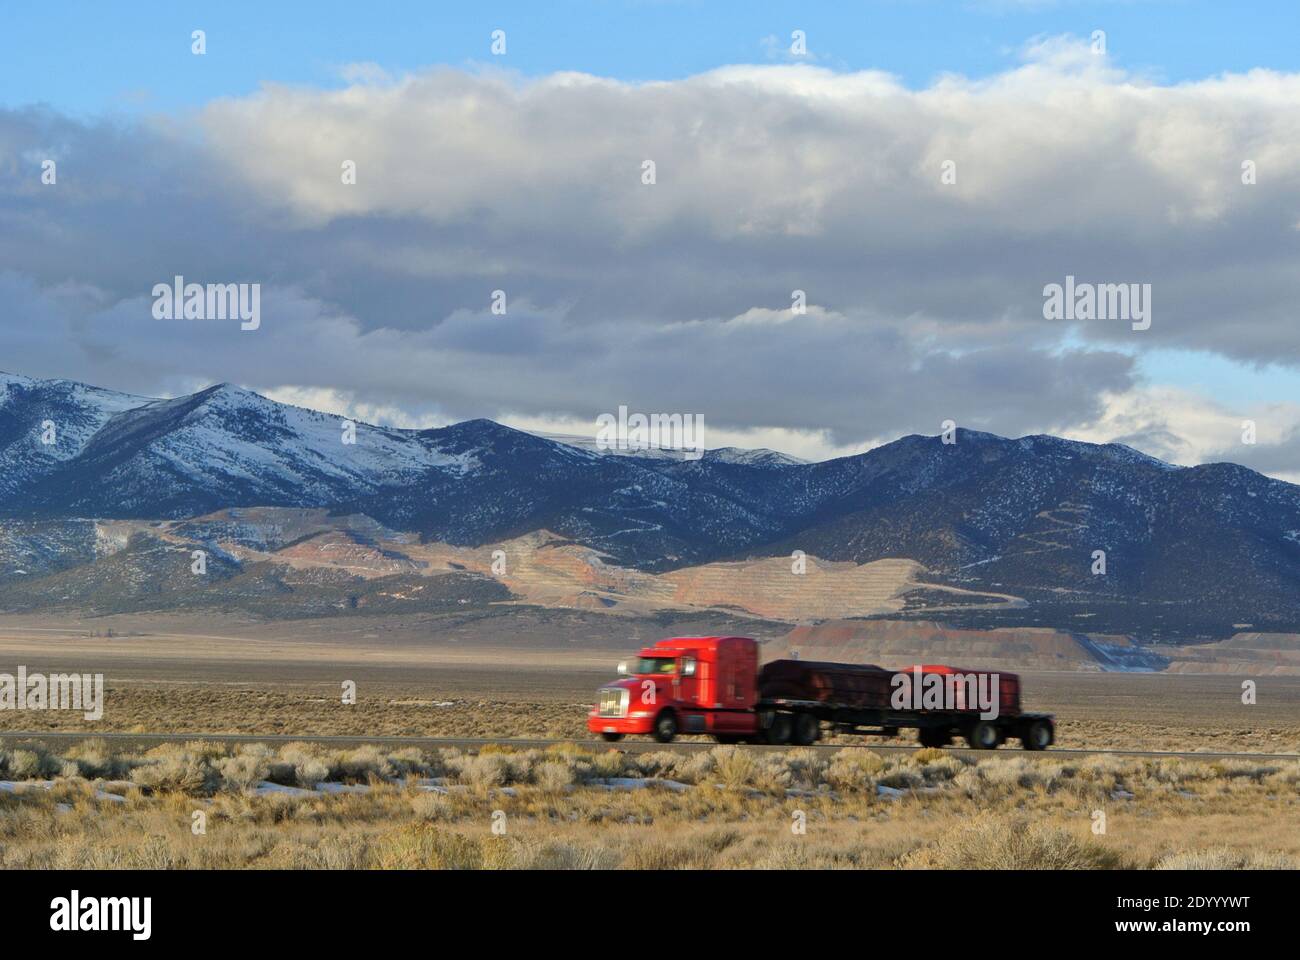 tractor trailer on hwy 80 in  snow capped mountain norther nevada high desert landscape  in early winter 2020 Stock Photo